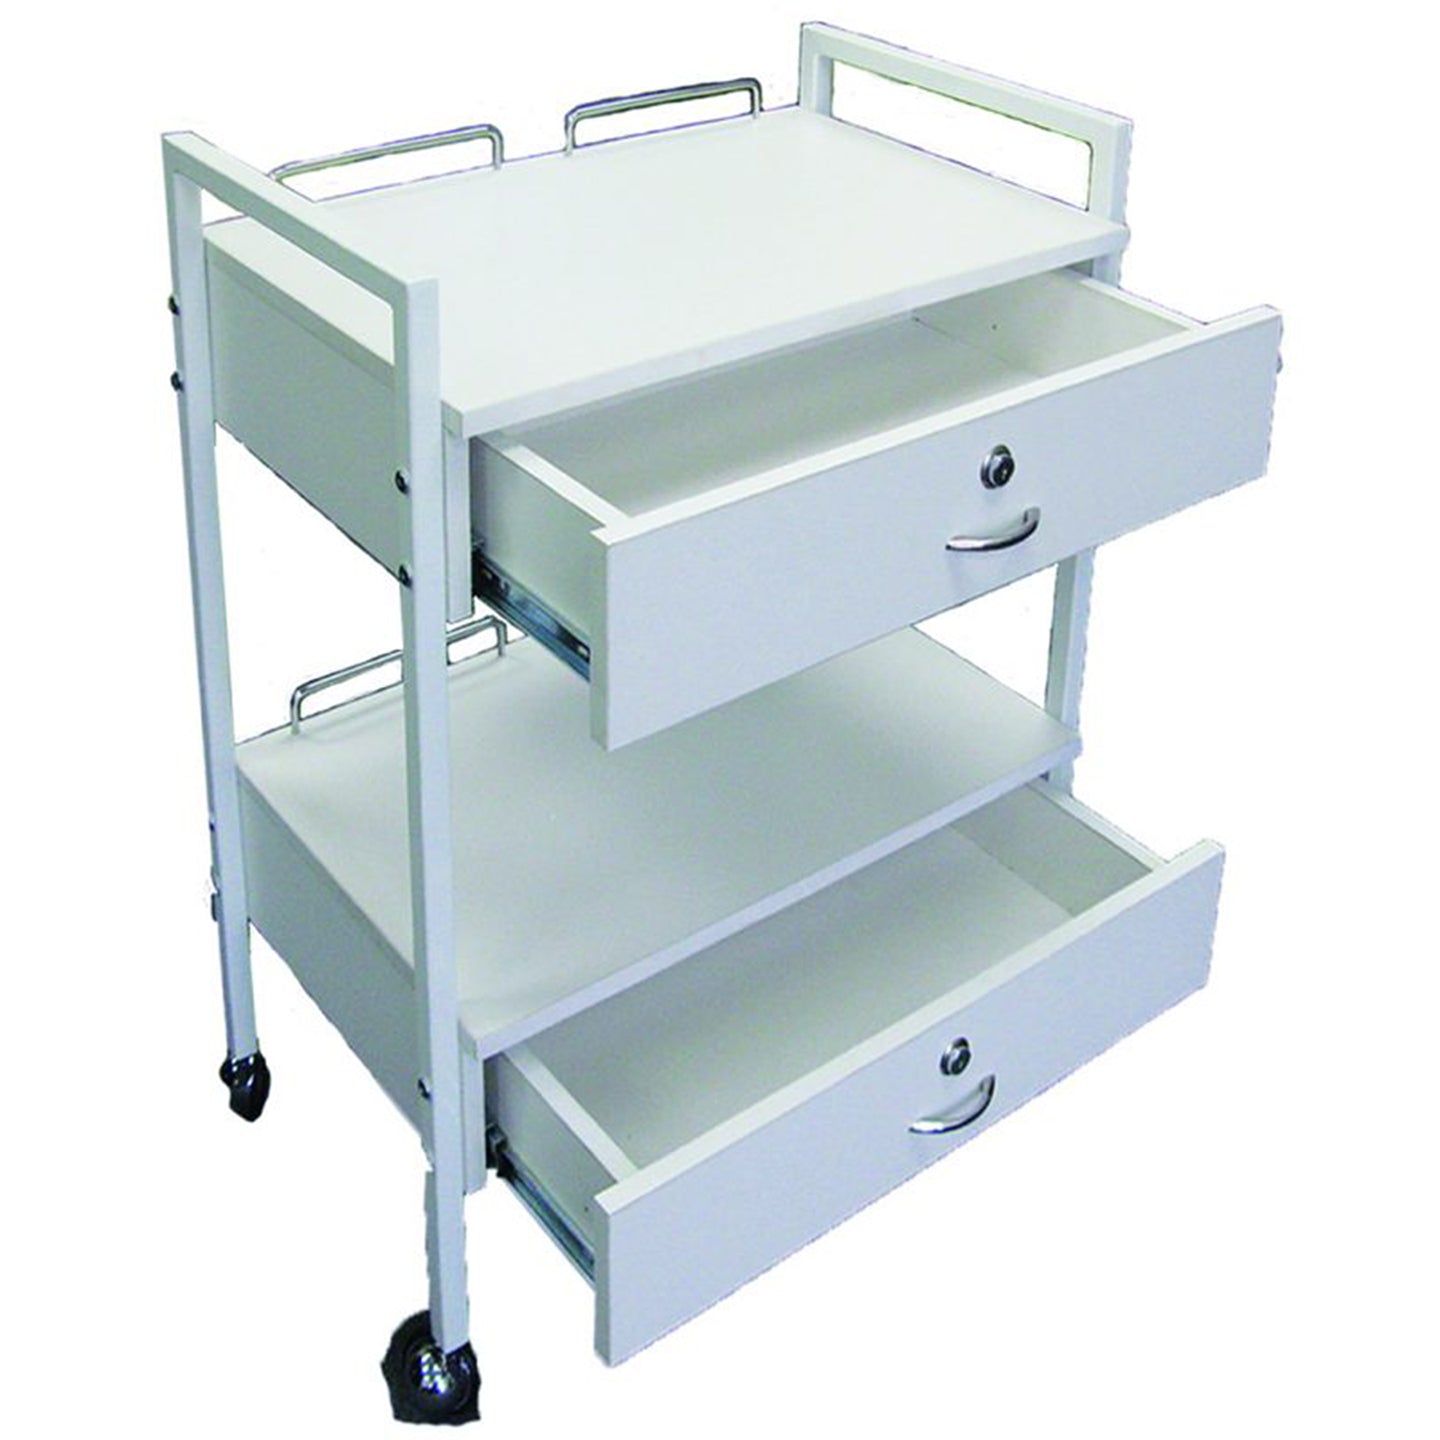 Trolley, metal frame with 2 drawers, white